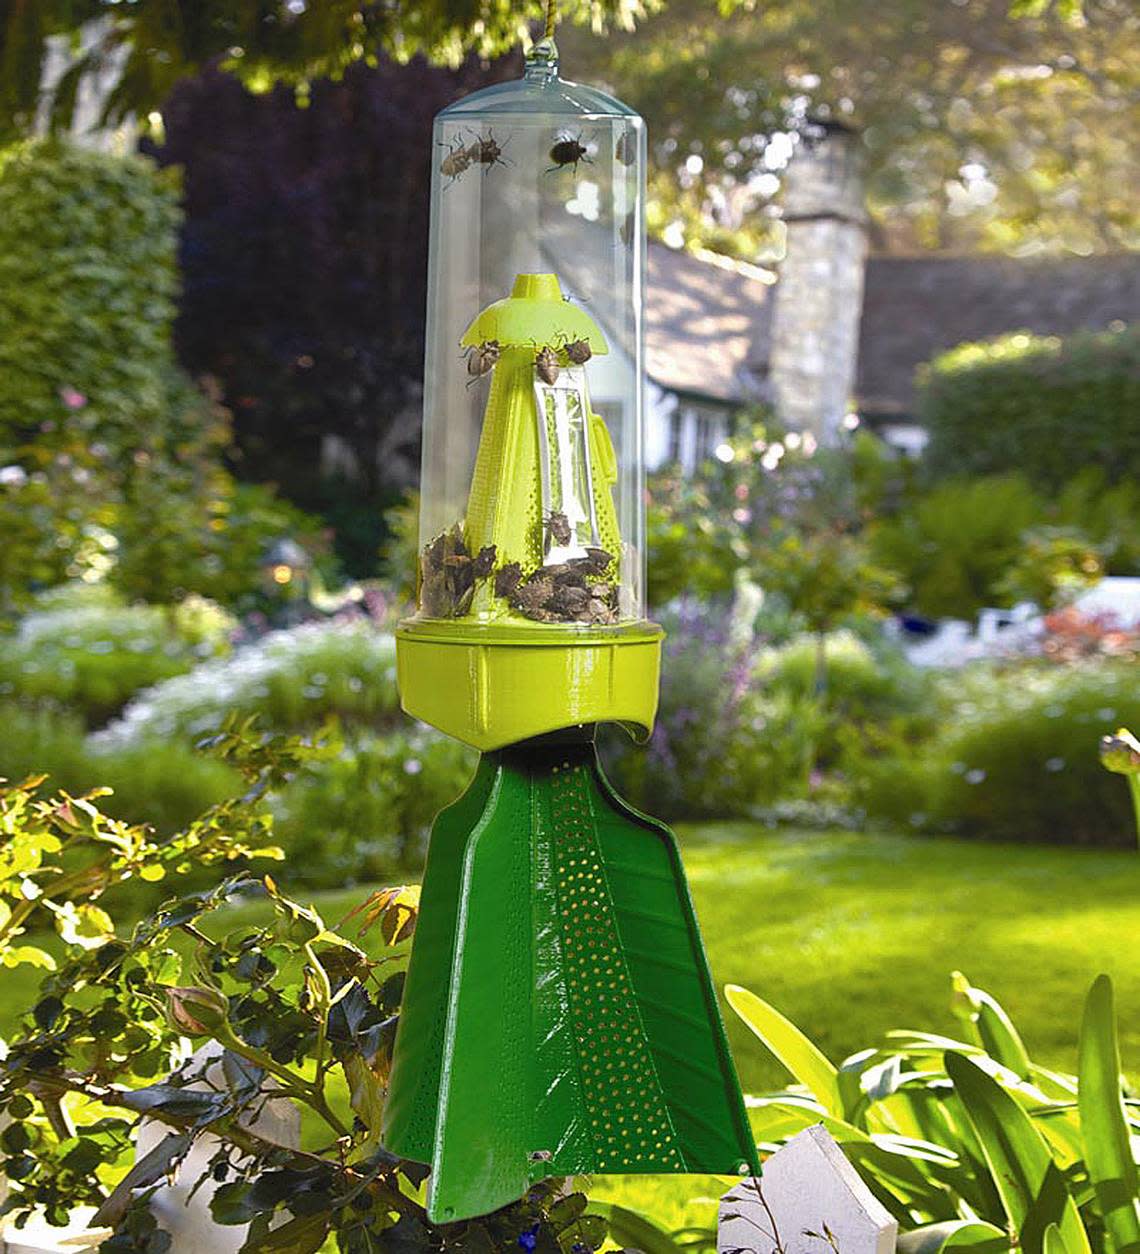 Pheromones lure stink bugs into this trap.